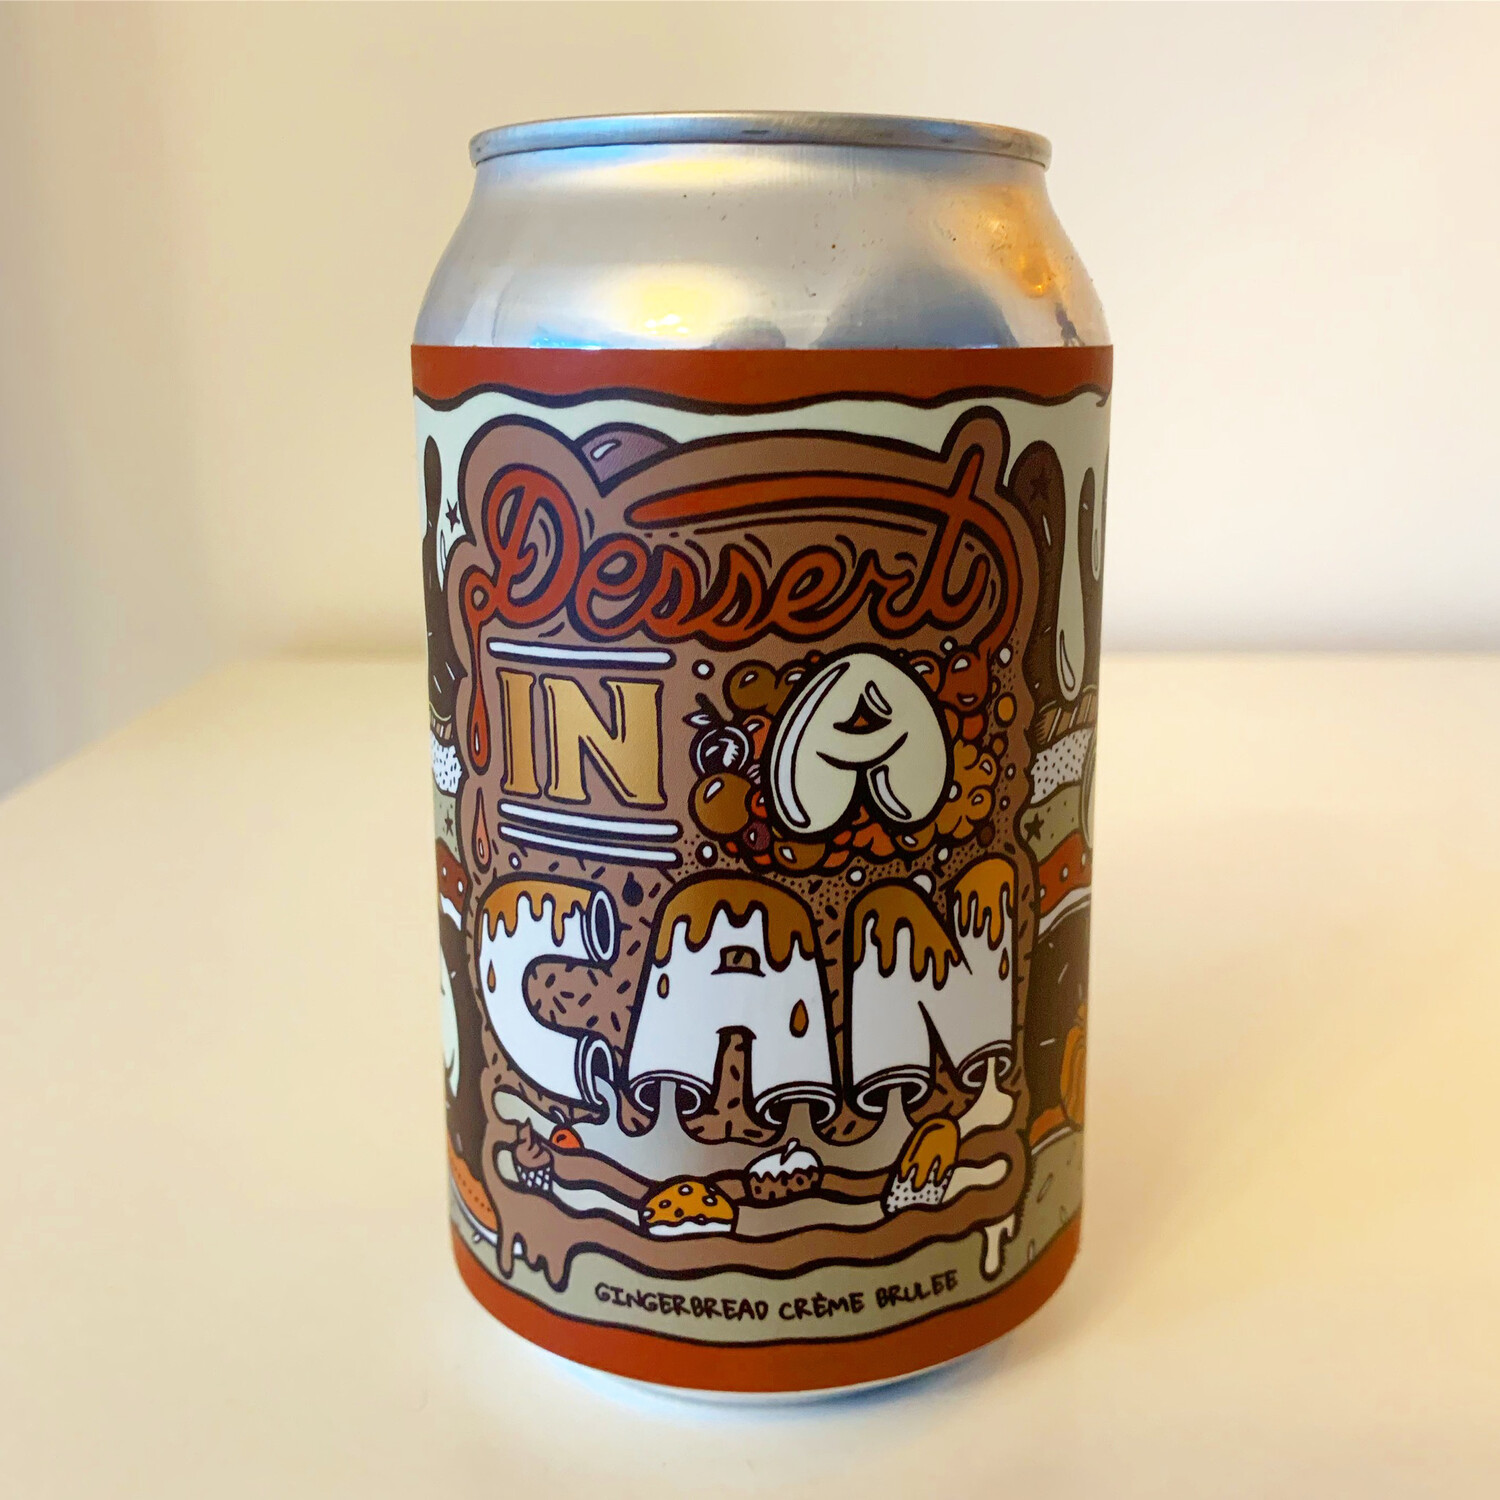 Amundsen 'Dessert In A Can' Gingerbread Crème Brulee Imperial Stout 330ml - 10.5%